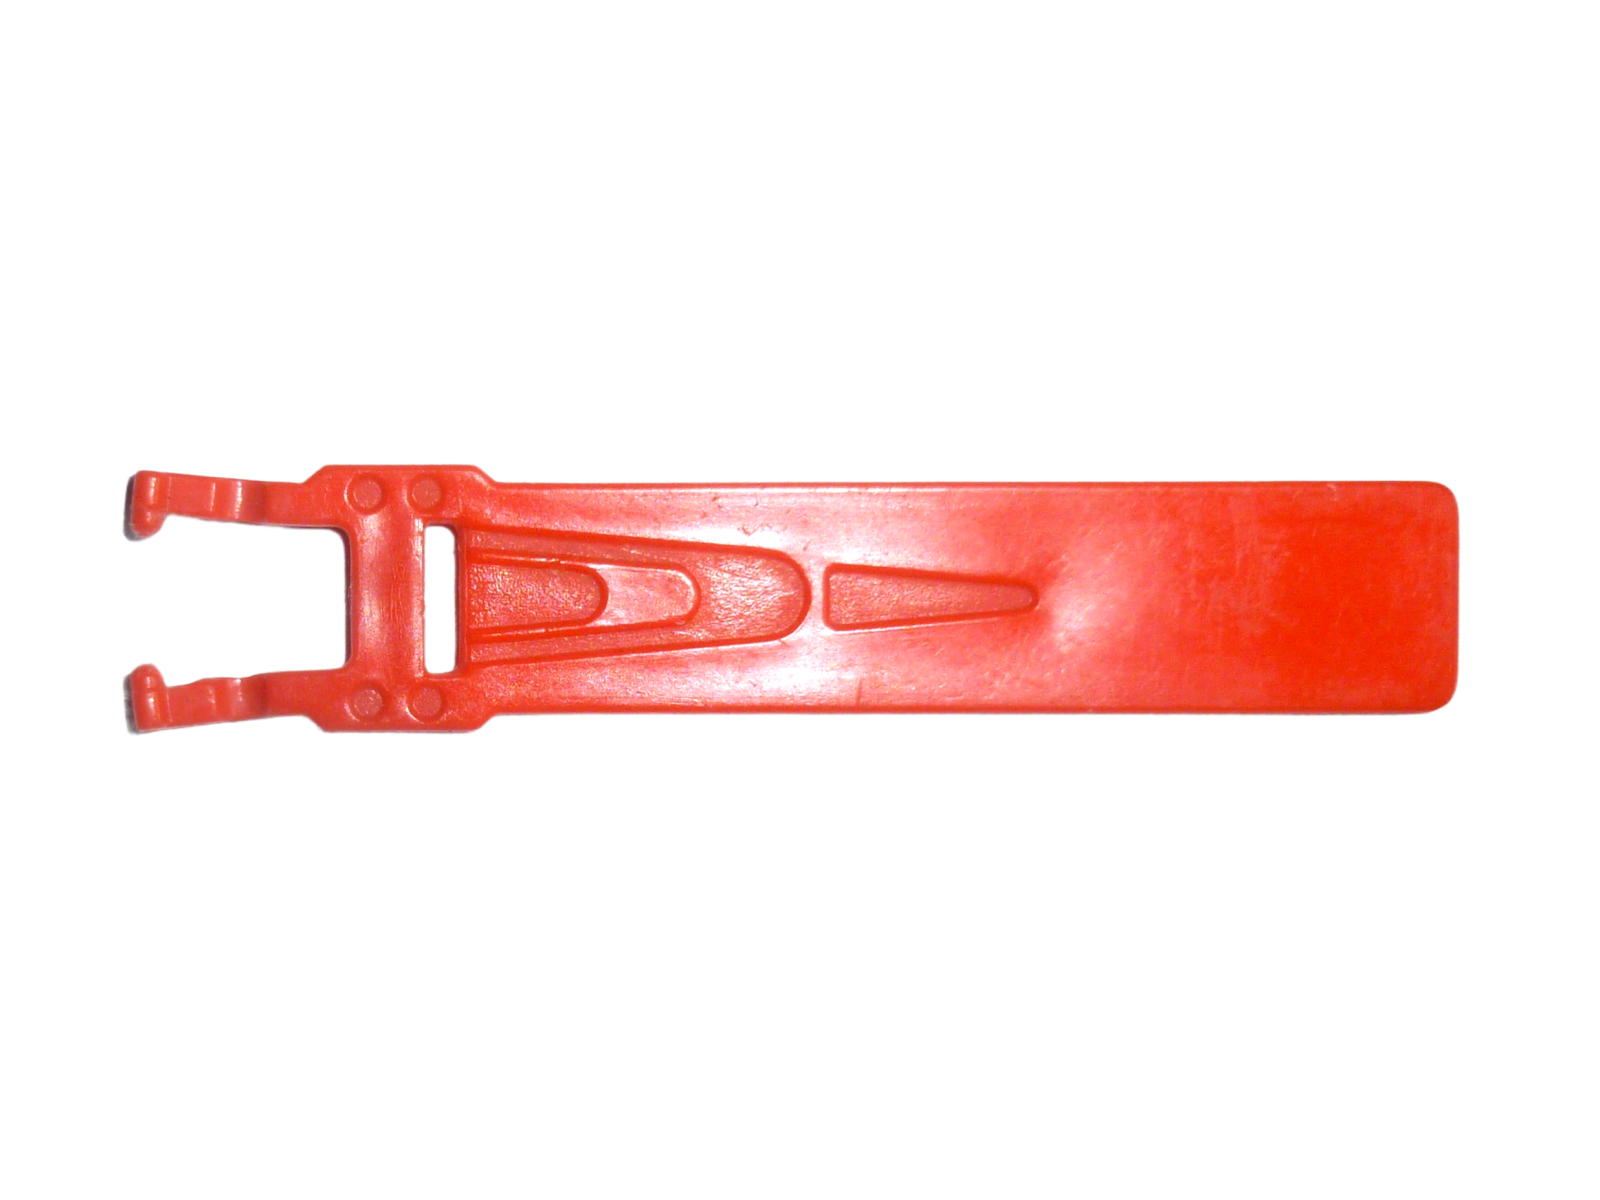 Ecto 2 PROPELLER blade red red helicopter part 1984 Kenner